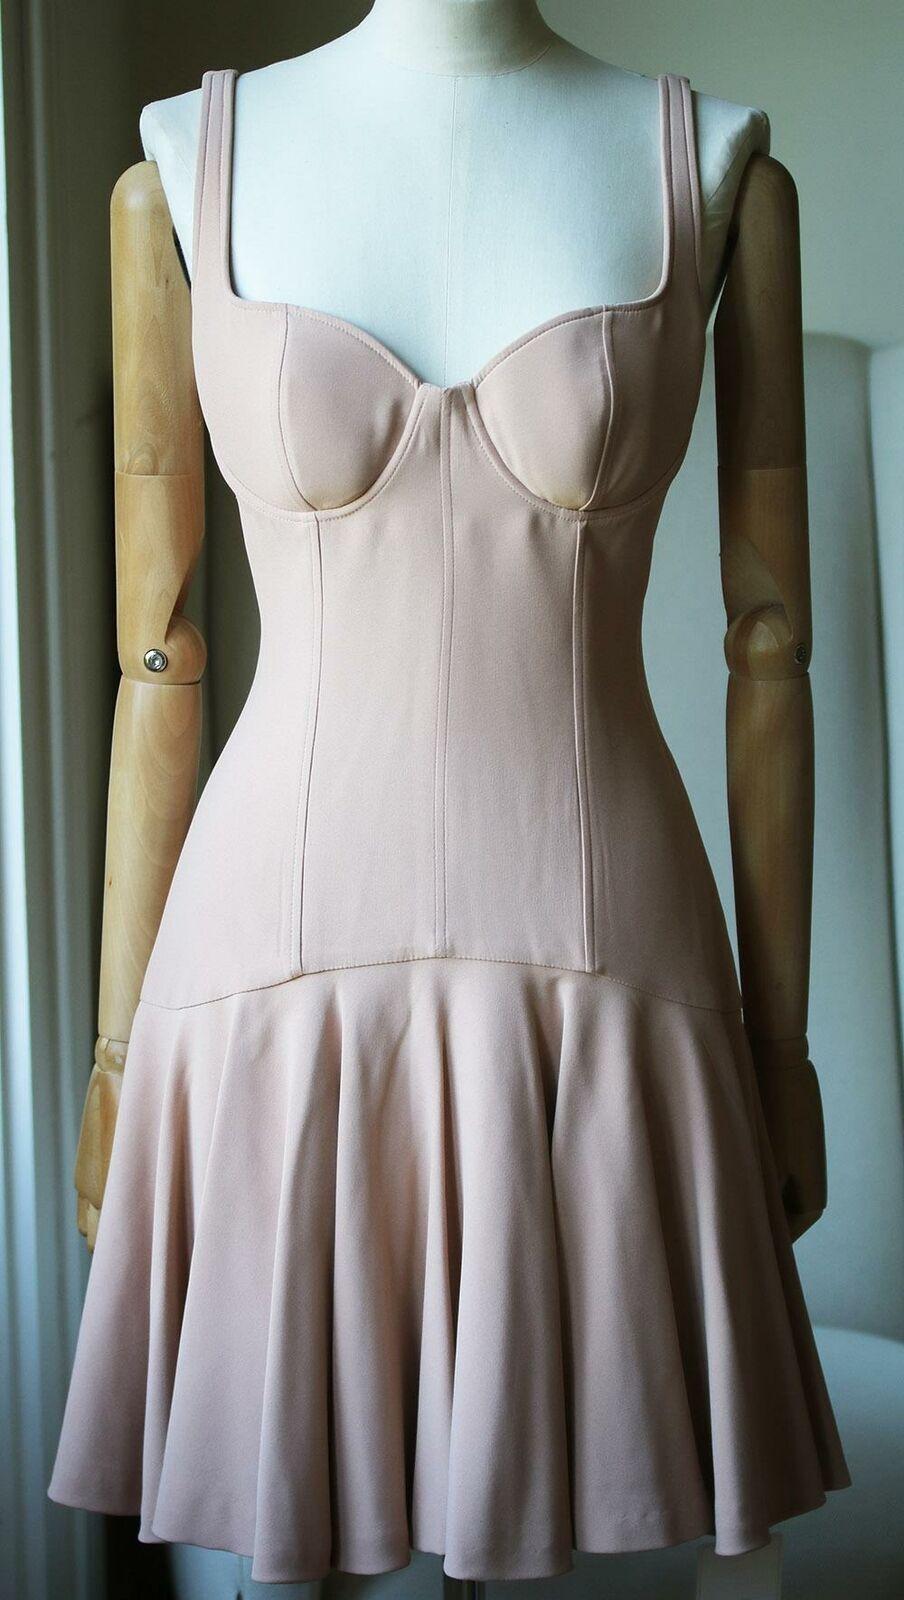 Nude crepe bustier dress from alexander mcqueen. Defined underwired cups. Structured bust with boning. Concealed zip down back. Sleeveless. Thin straps. Fluted flared skirt. Fully lined. Colour: nude. 50% acetate, 50% rayon.

Size: IT 42 (UK 10, US